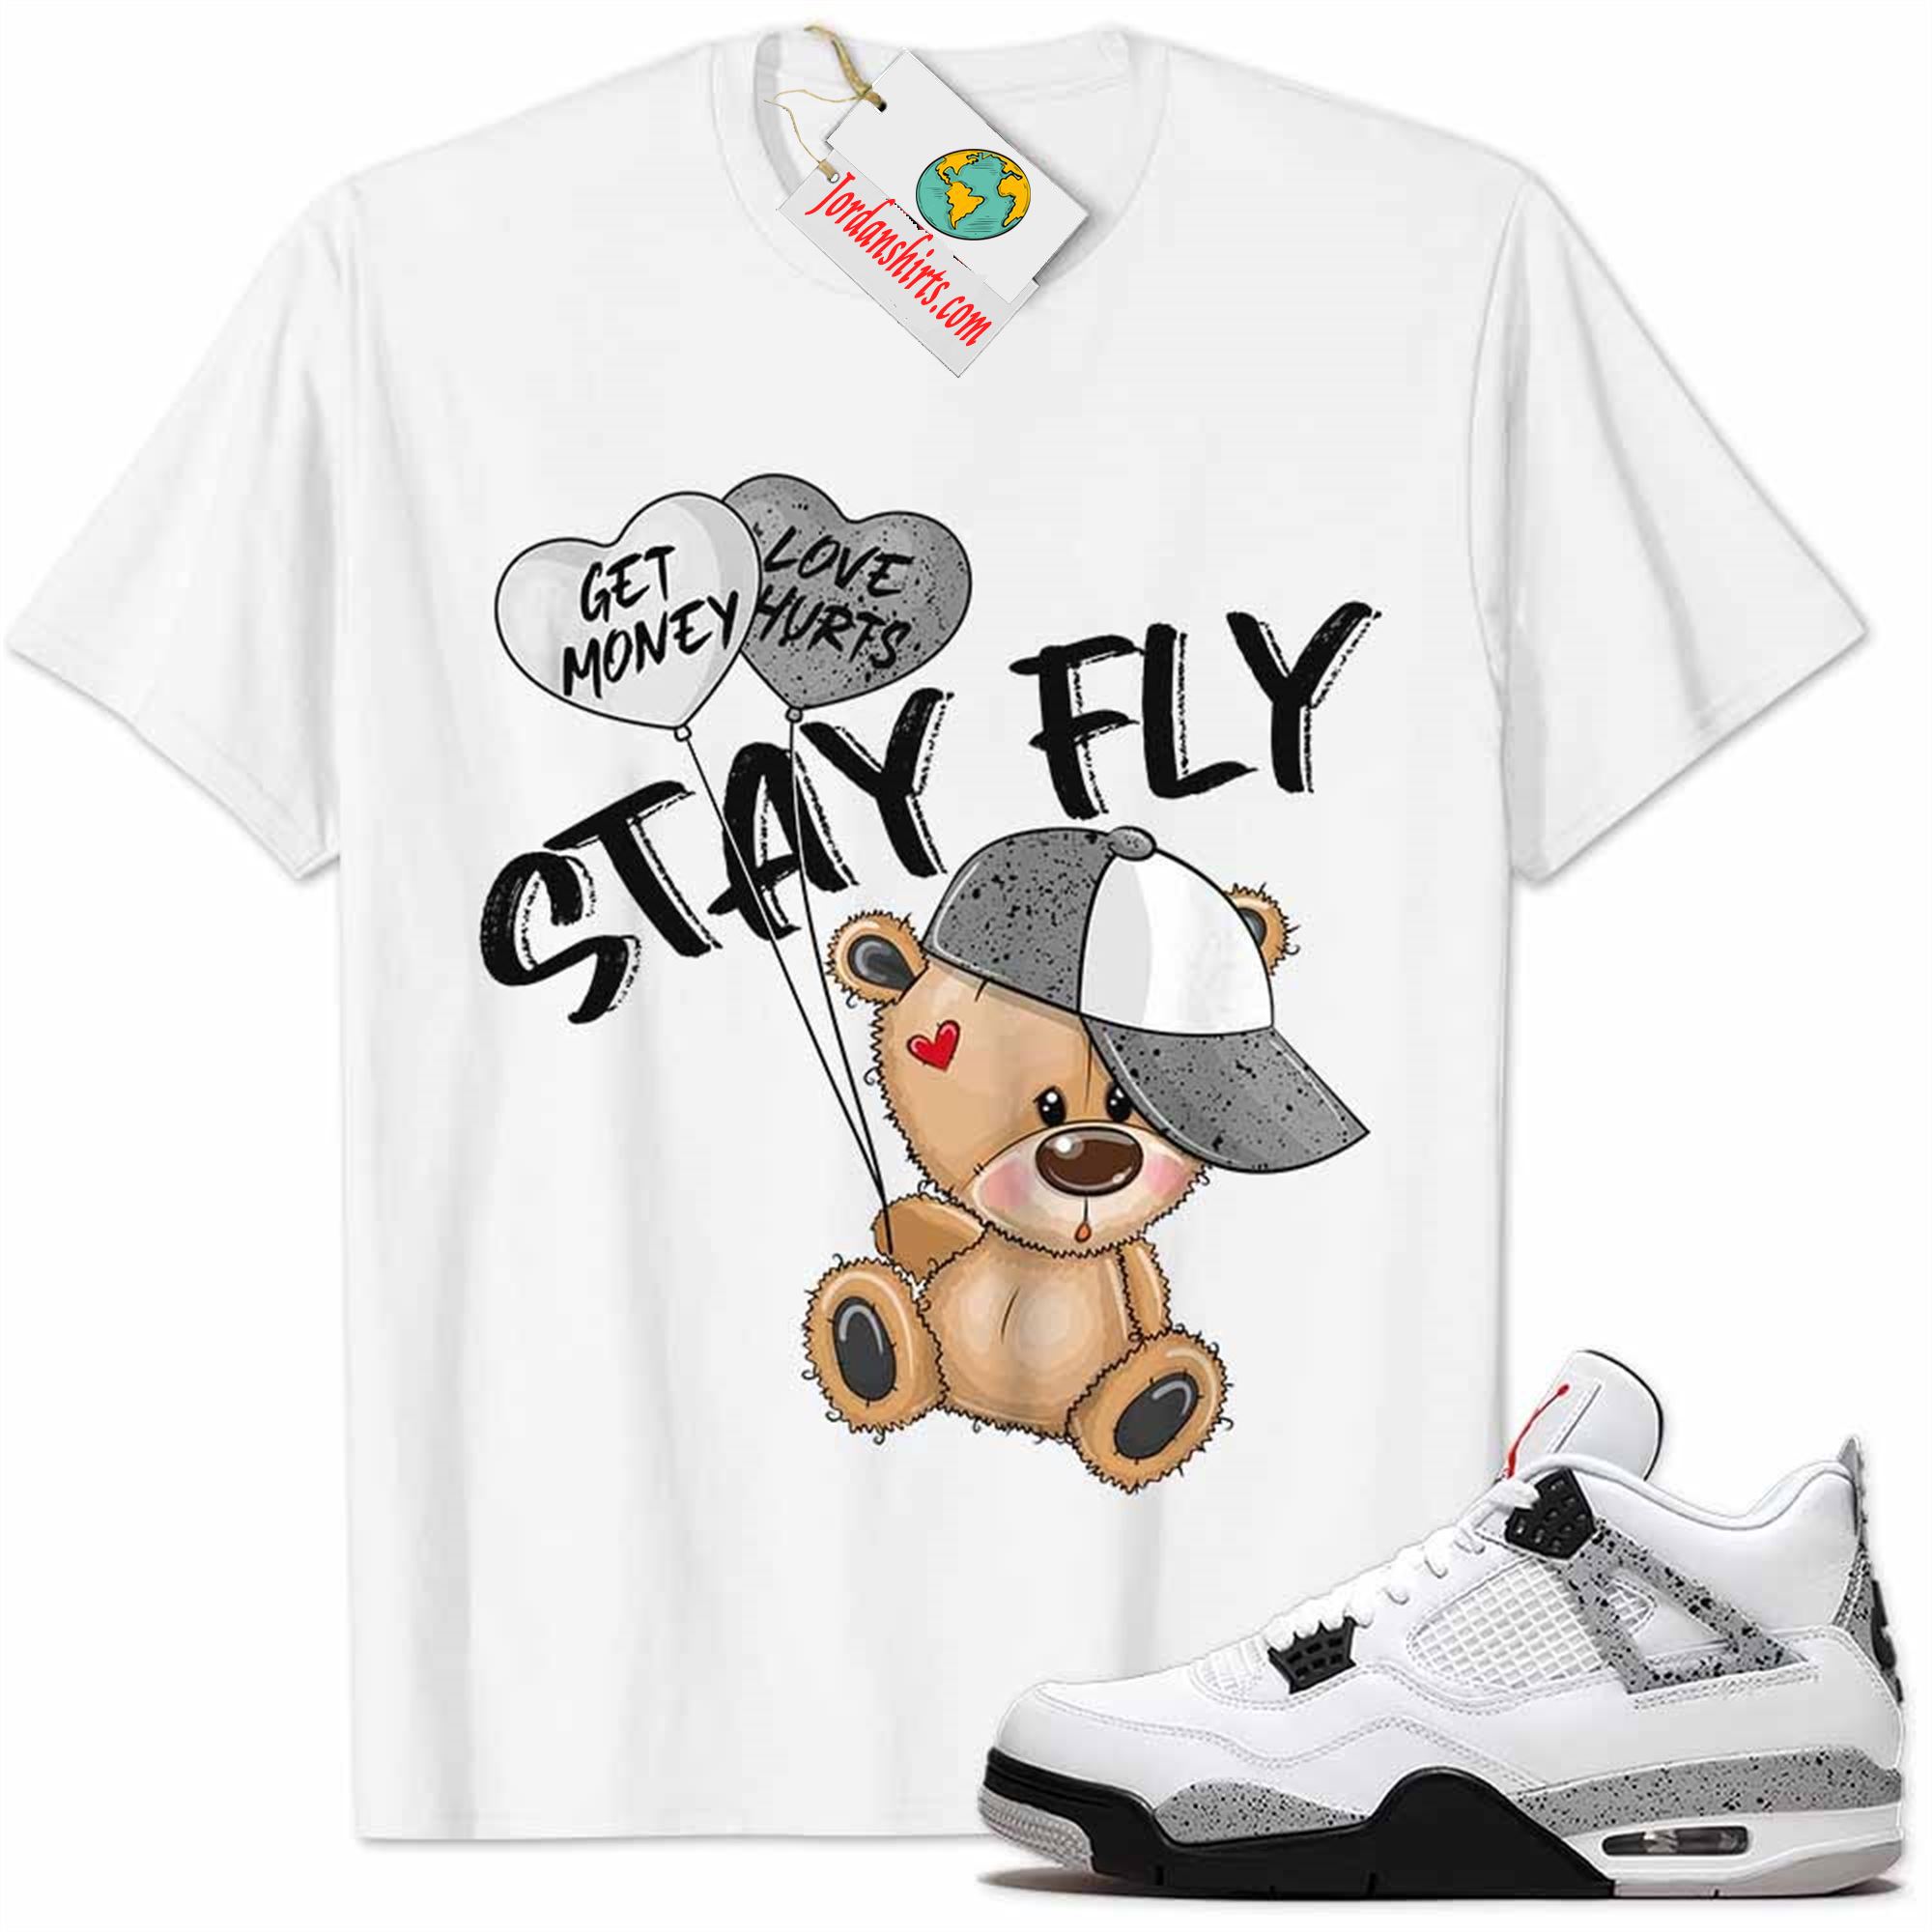 Jordan 4 Shirt, Cement 4s Shirt Cute Teddy Bear Stay Fly Get Money White Plus Size Up To 5xl